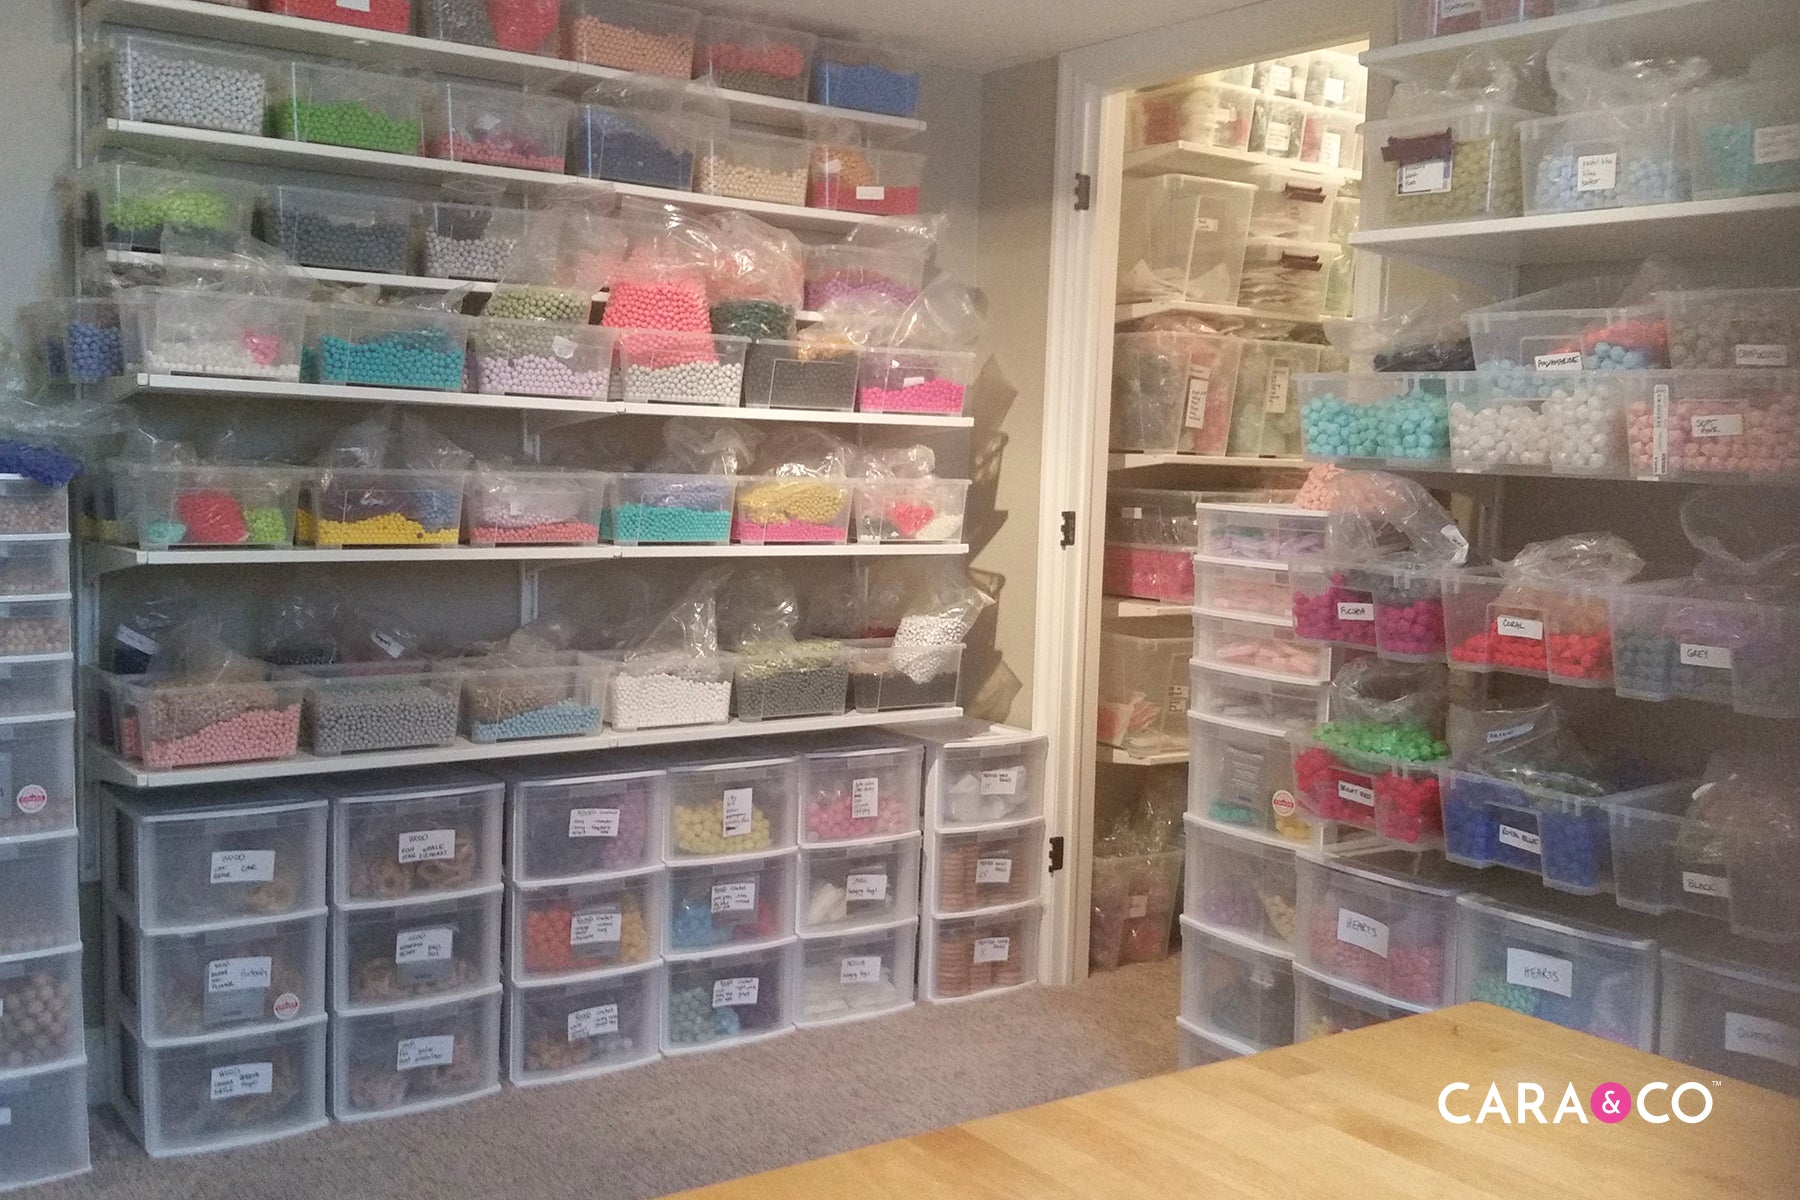 Starting an E-Commerce Business - Cara & Co Silicone Craft Supply